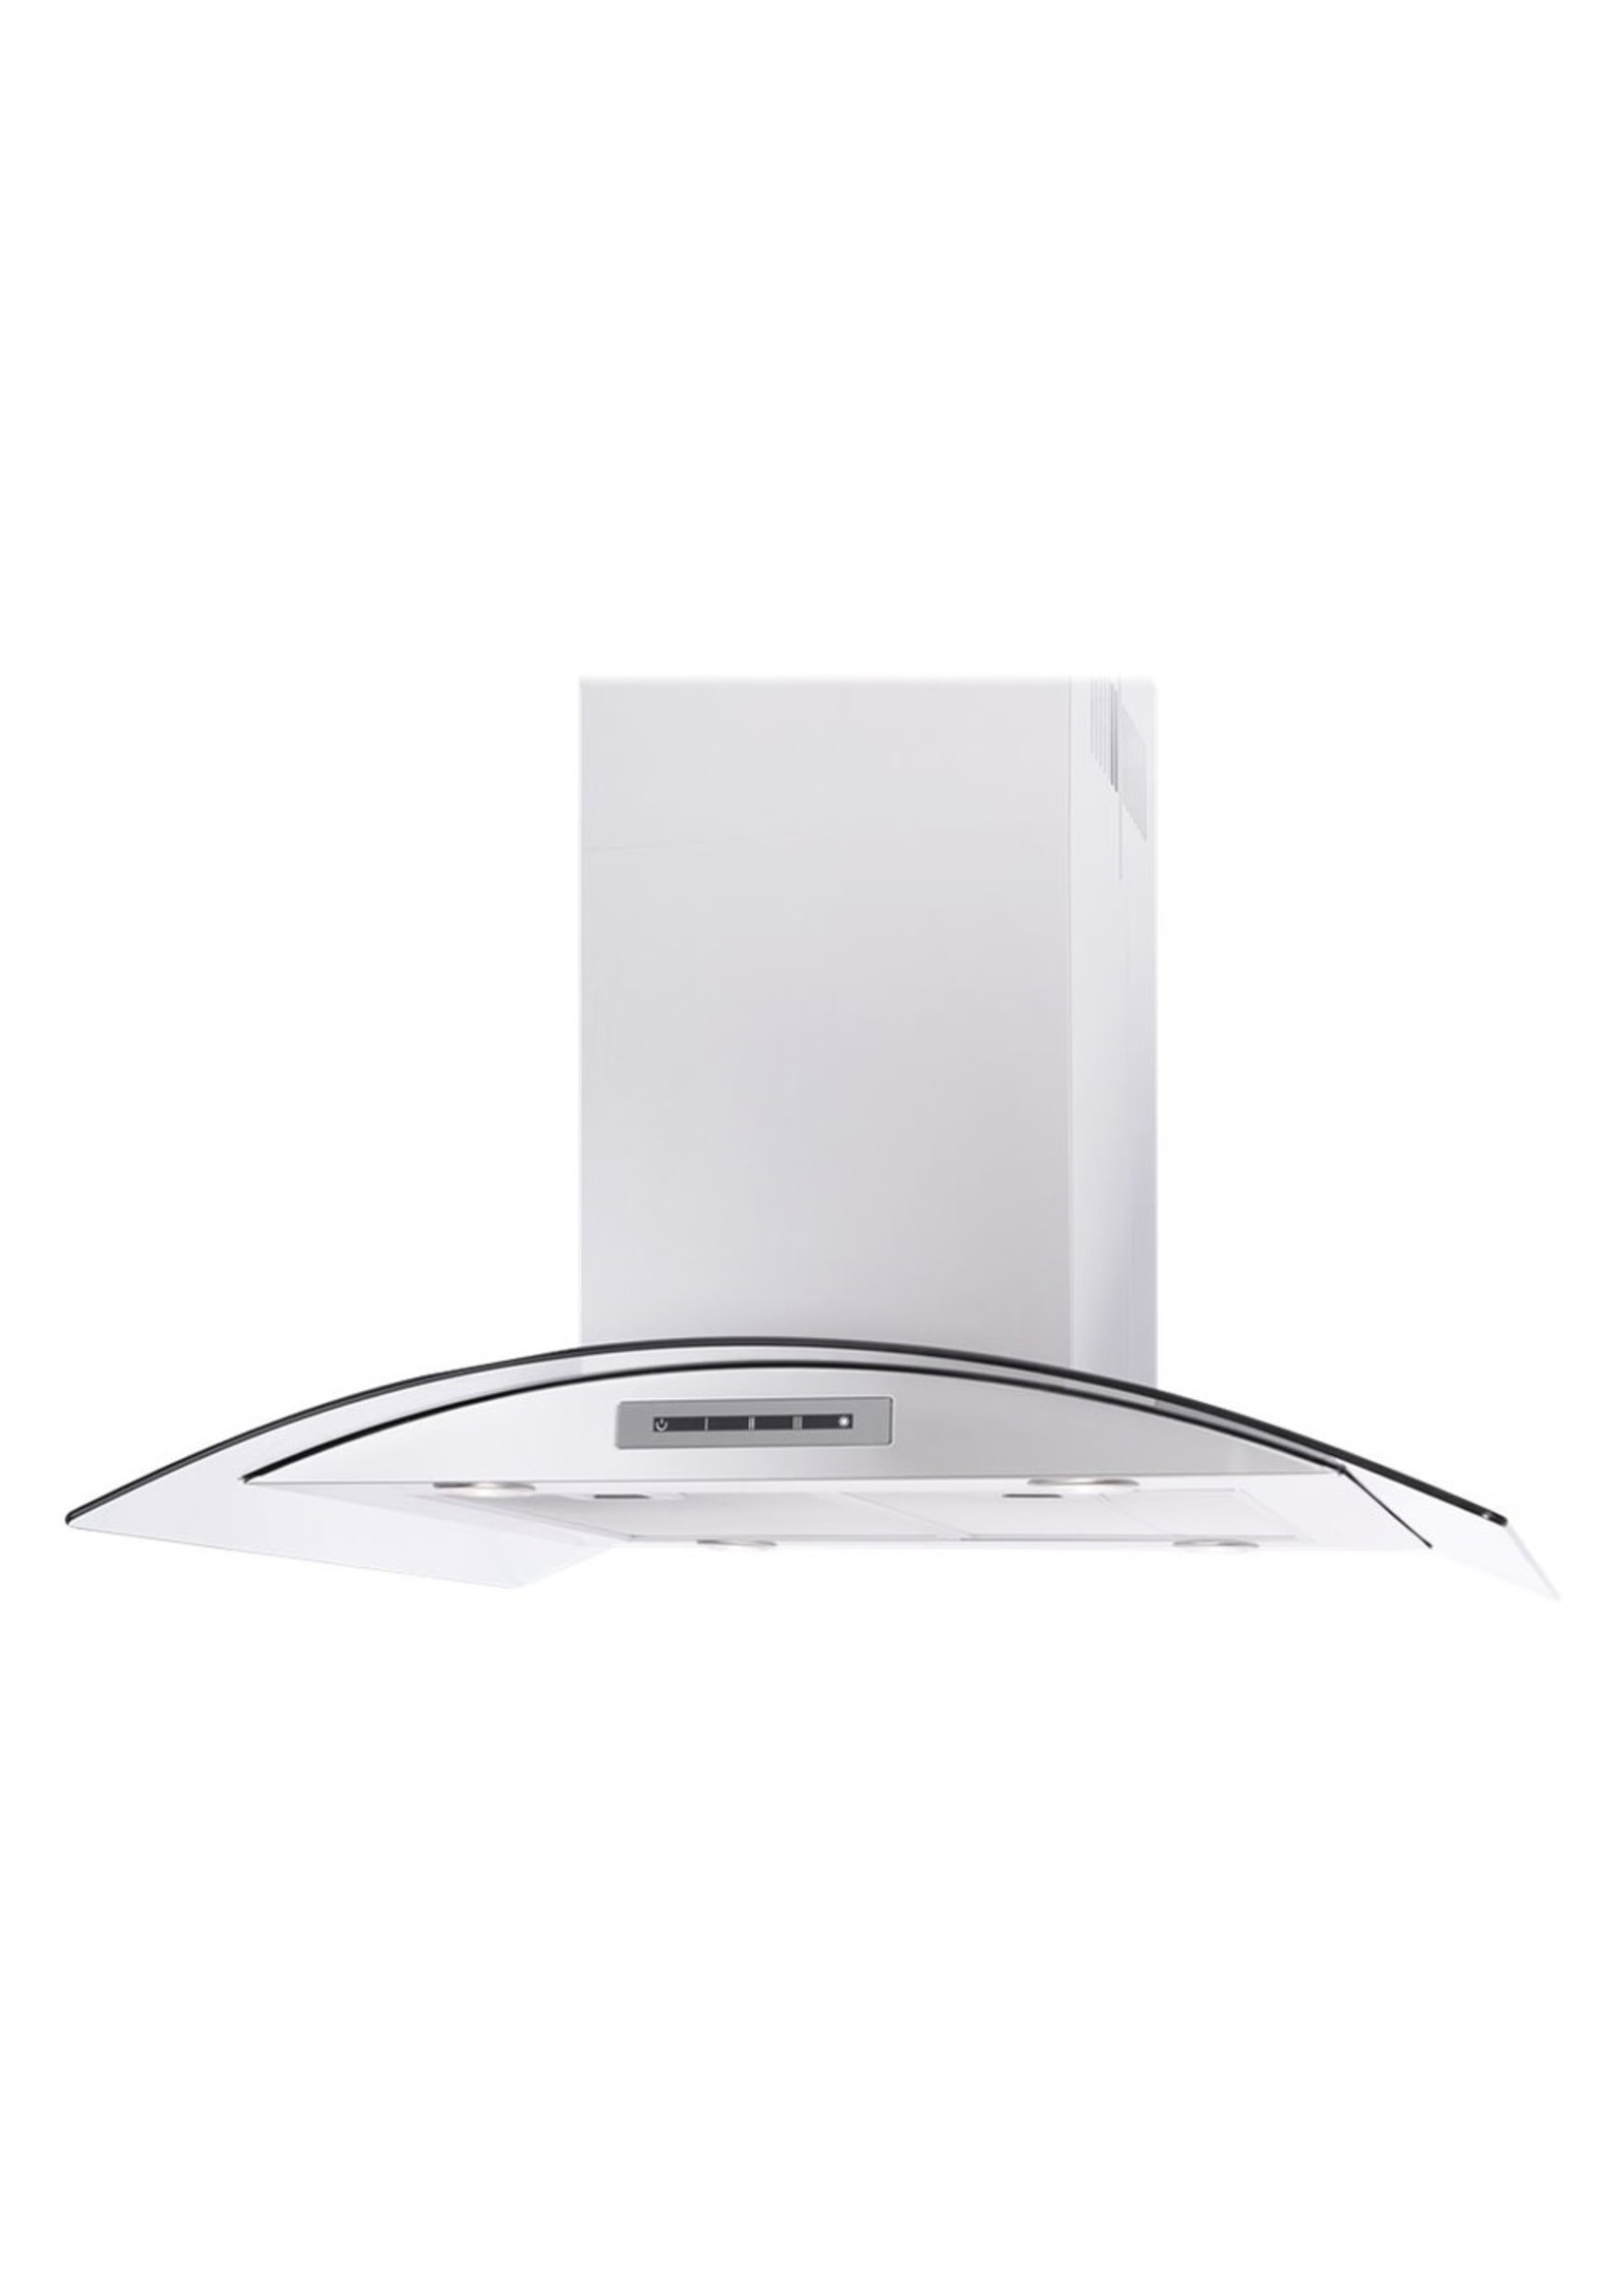 Windster Hoods - 36" Convertible Range Hood - Stainless steel and glass